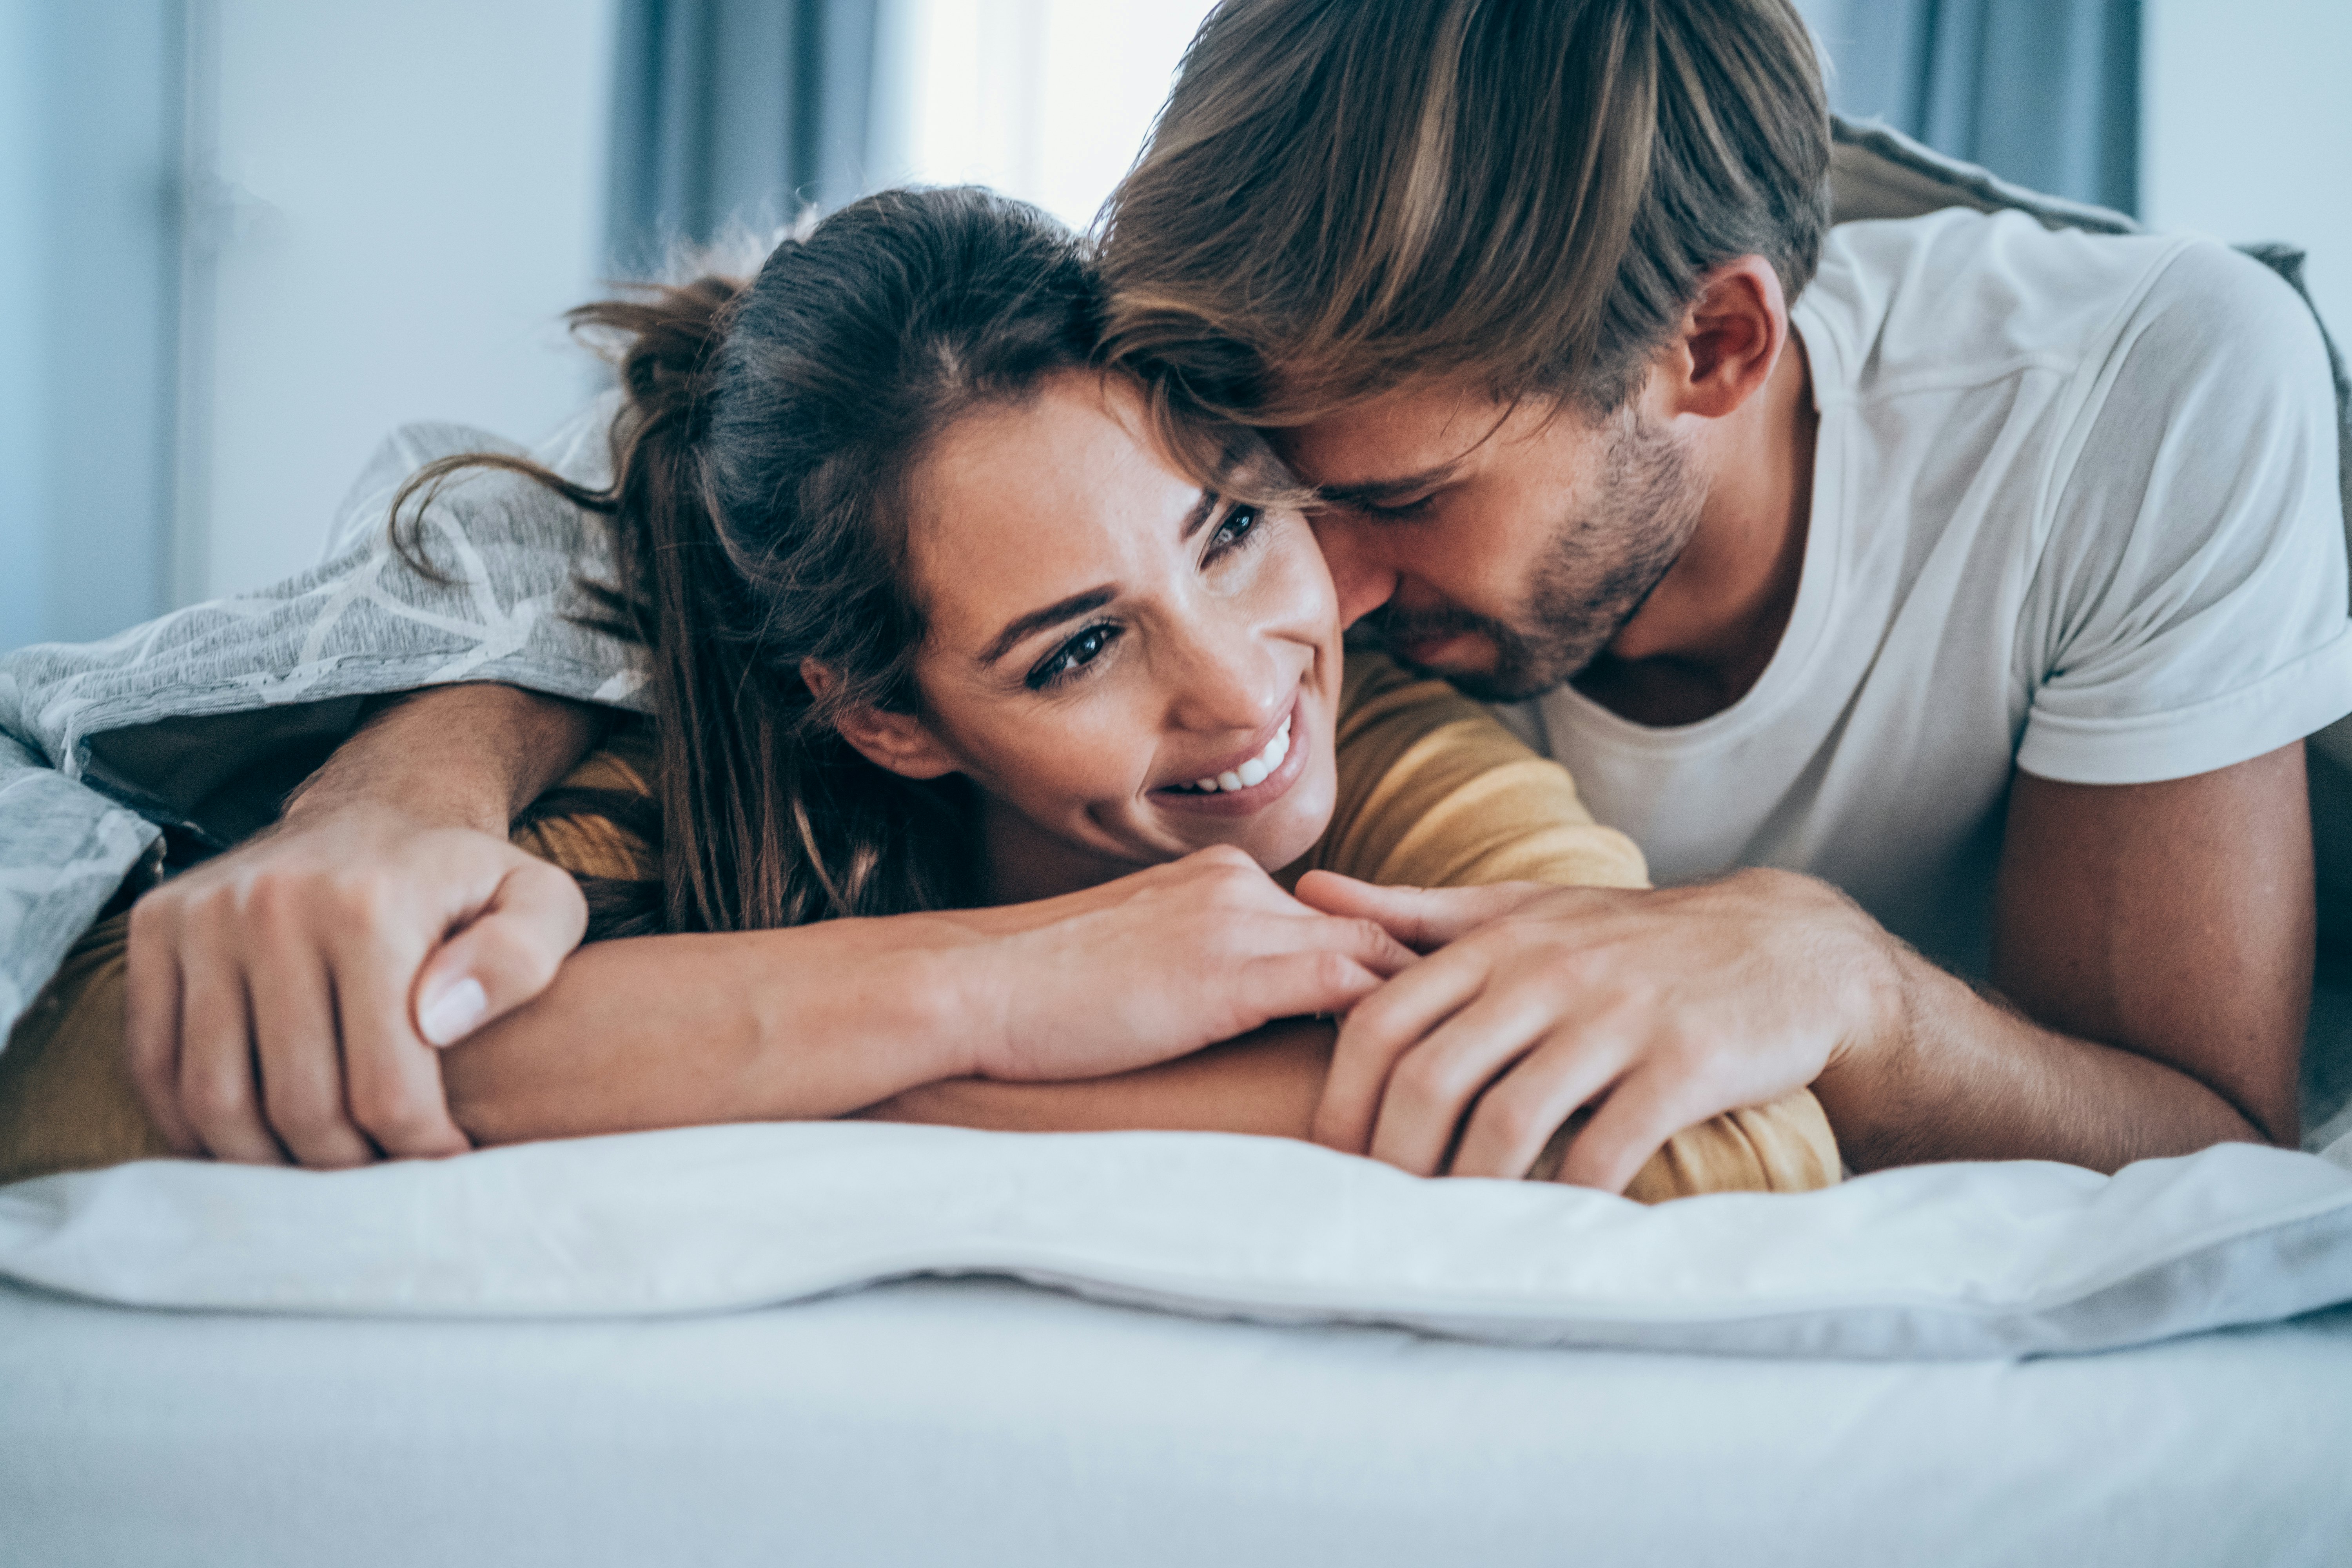 What Men Want In Bed 8 Surprising Insights From Sex Research image